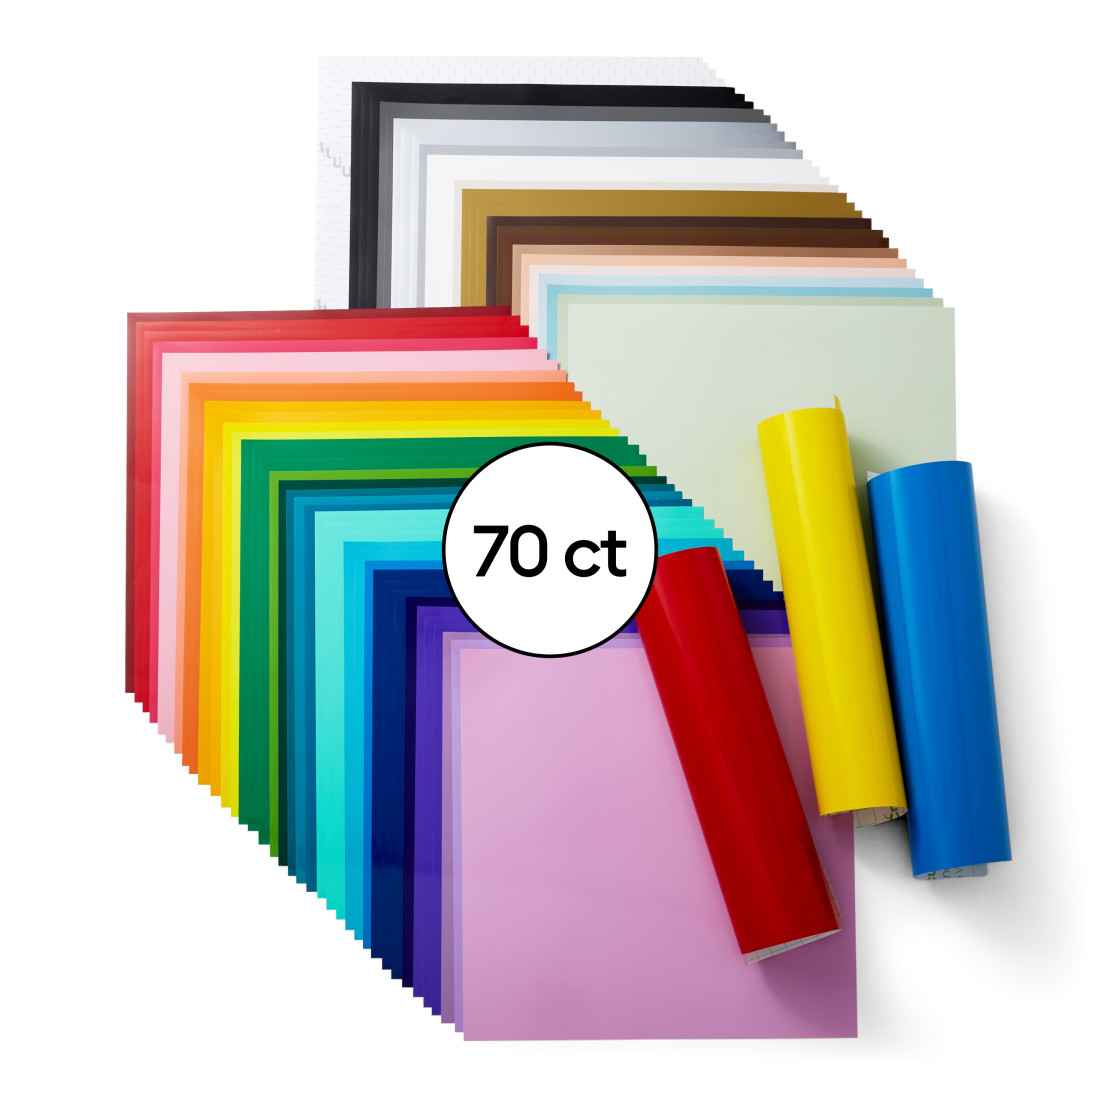  Ohuhu Permanent Vinyl Sheets for Cricut: 70 Packs Craft  Adhesive Vinyl for Cricut Maker & All Kinds of Cutting Machines, 60 Backed  Vinyls + 10 Transfer Papers - 30 Colors for